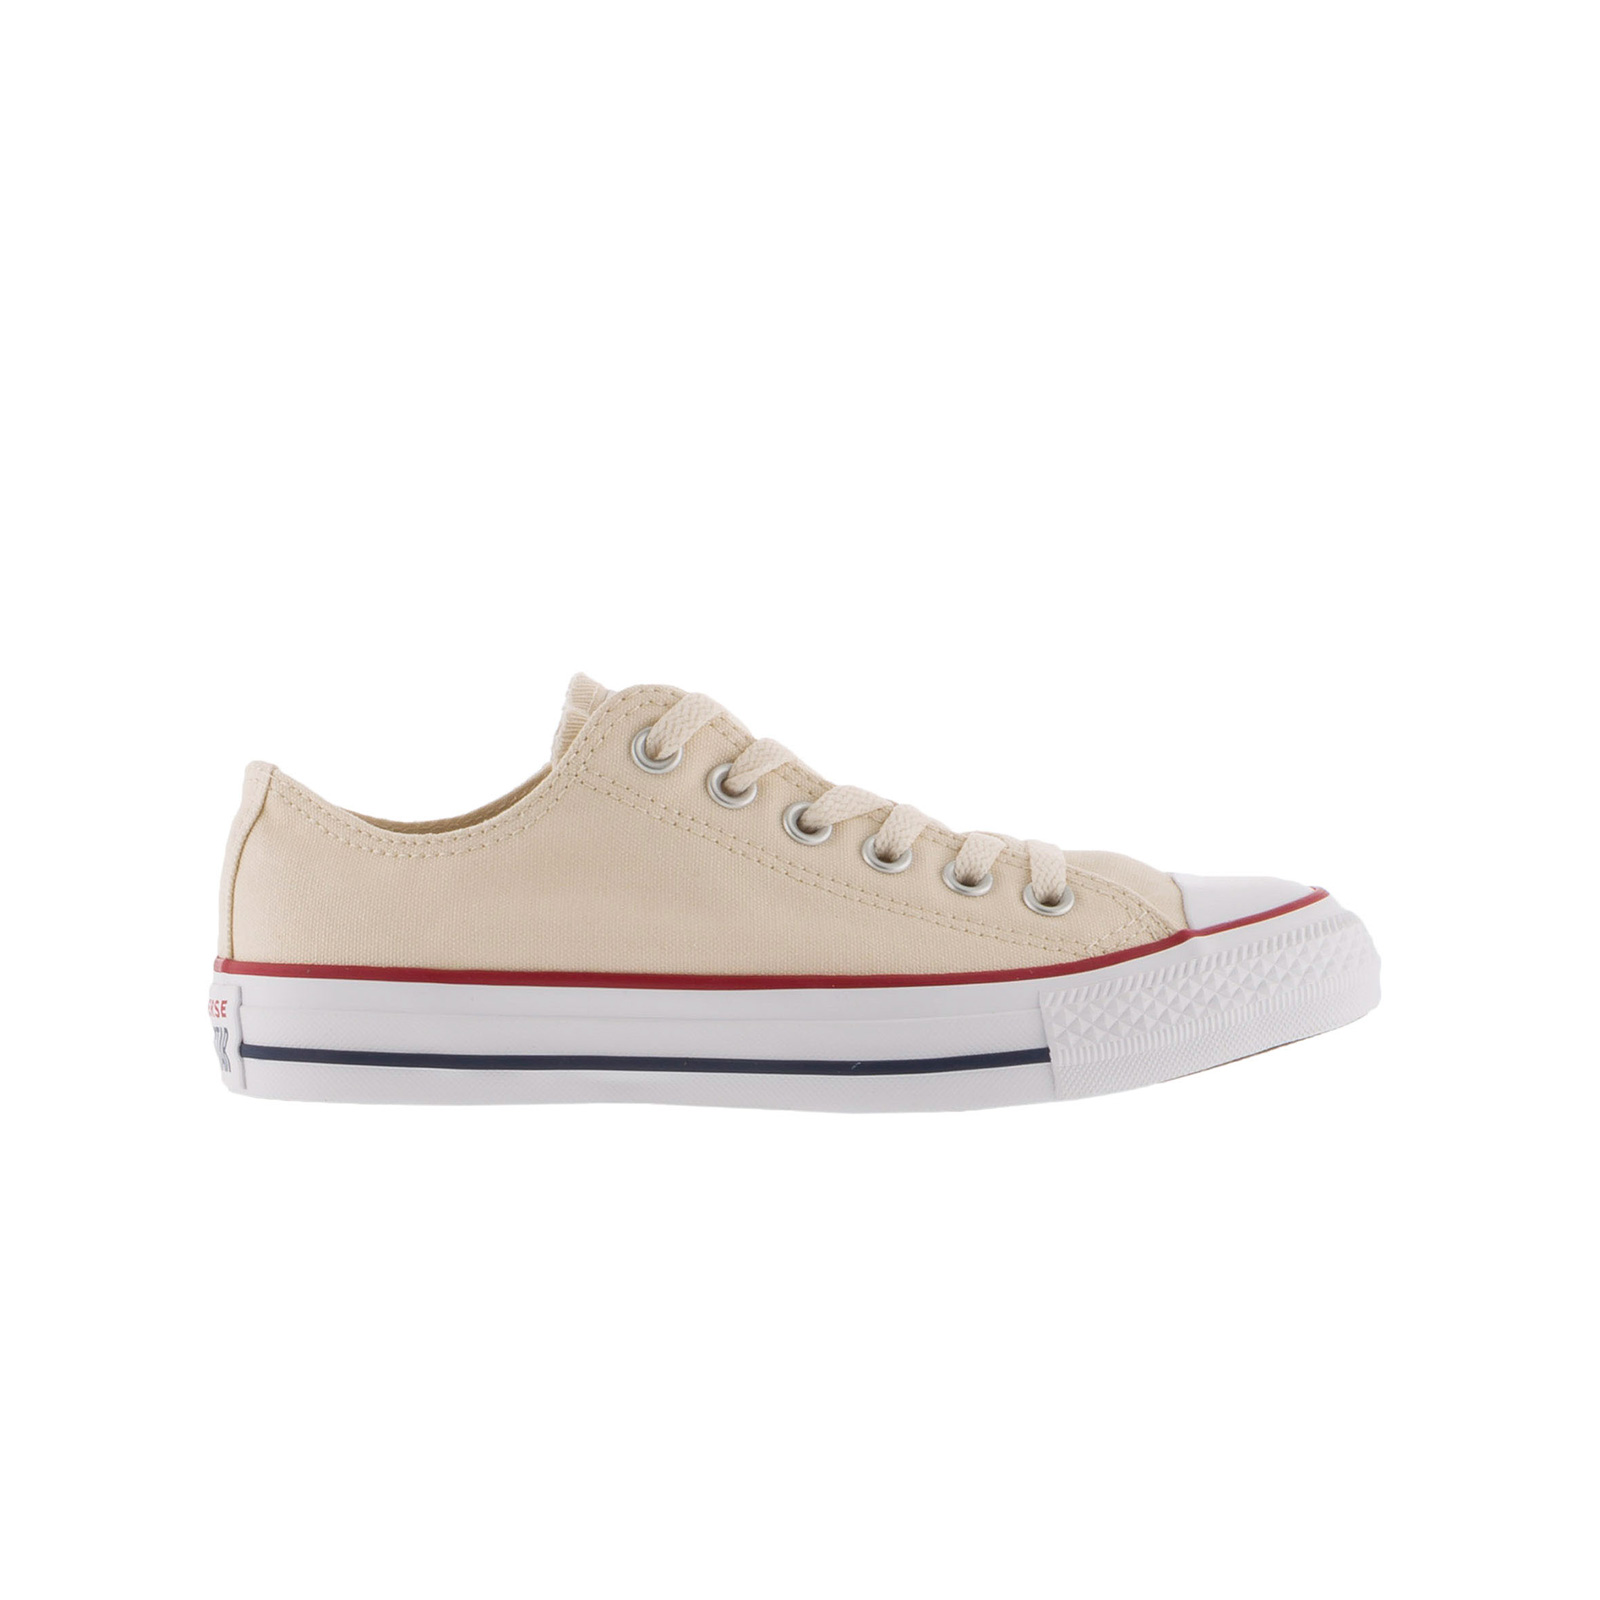 Converse - CHUCK TAYLOR ALL STAR - 101-NATURAL IVORY Ανδρικά > Παπούτσια > Sneaker > Παπούτσι Low Cut